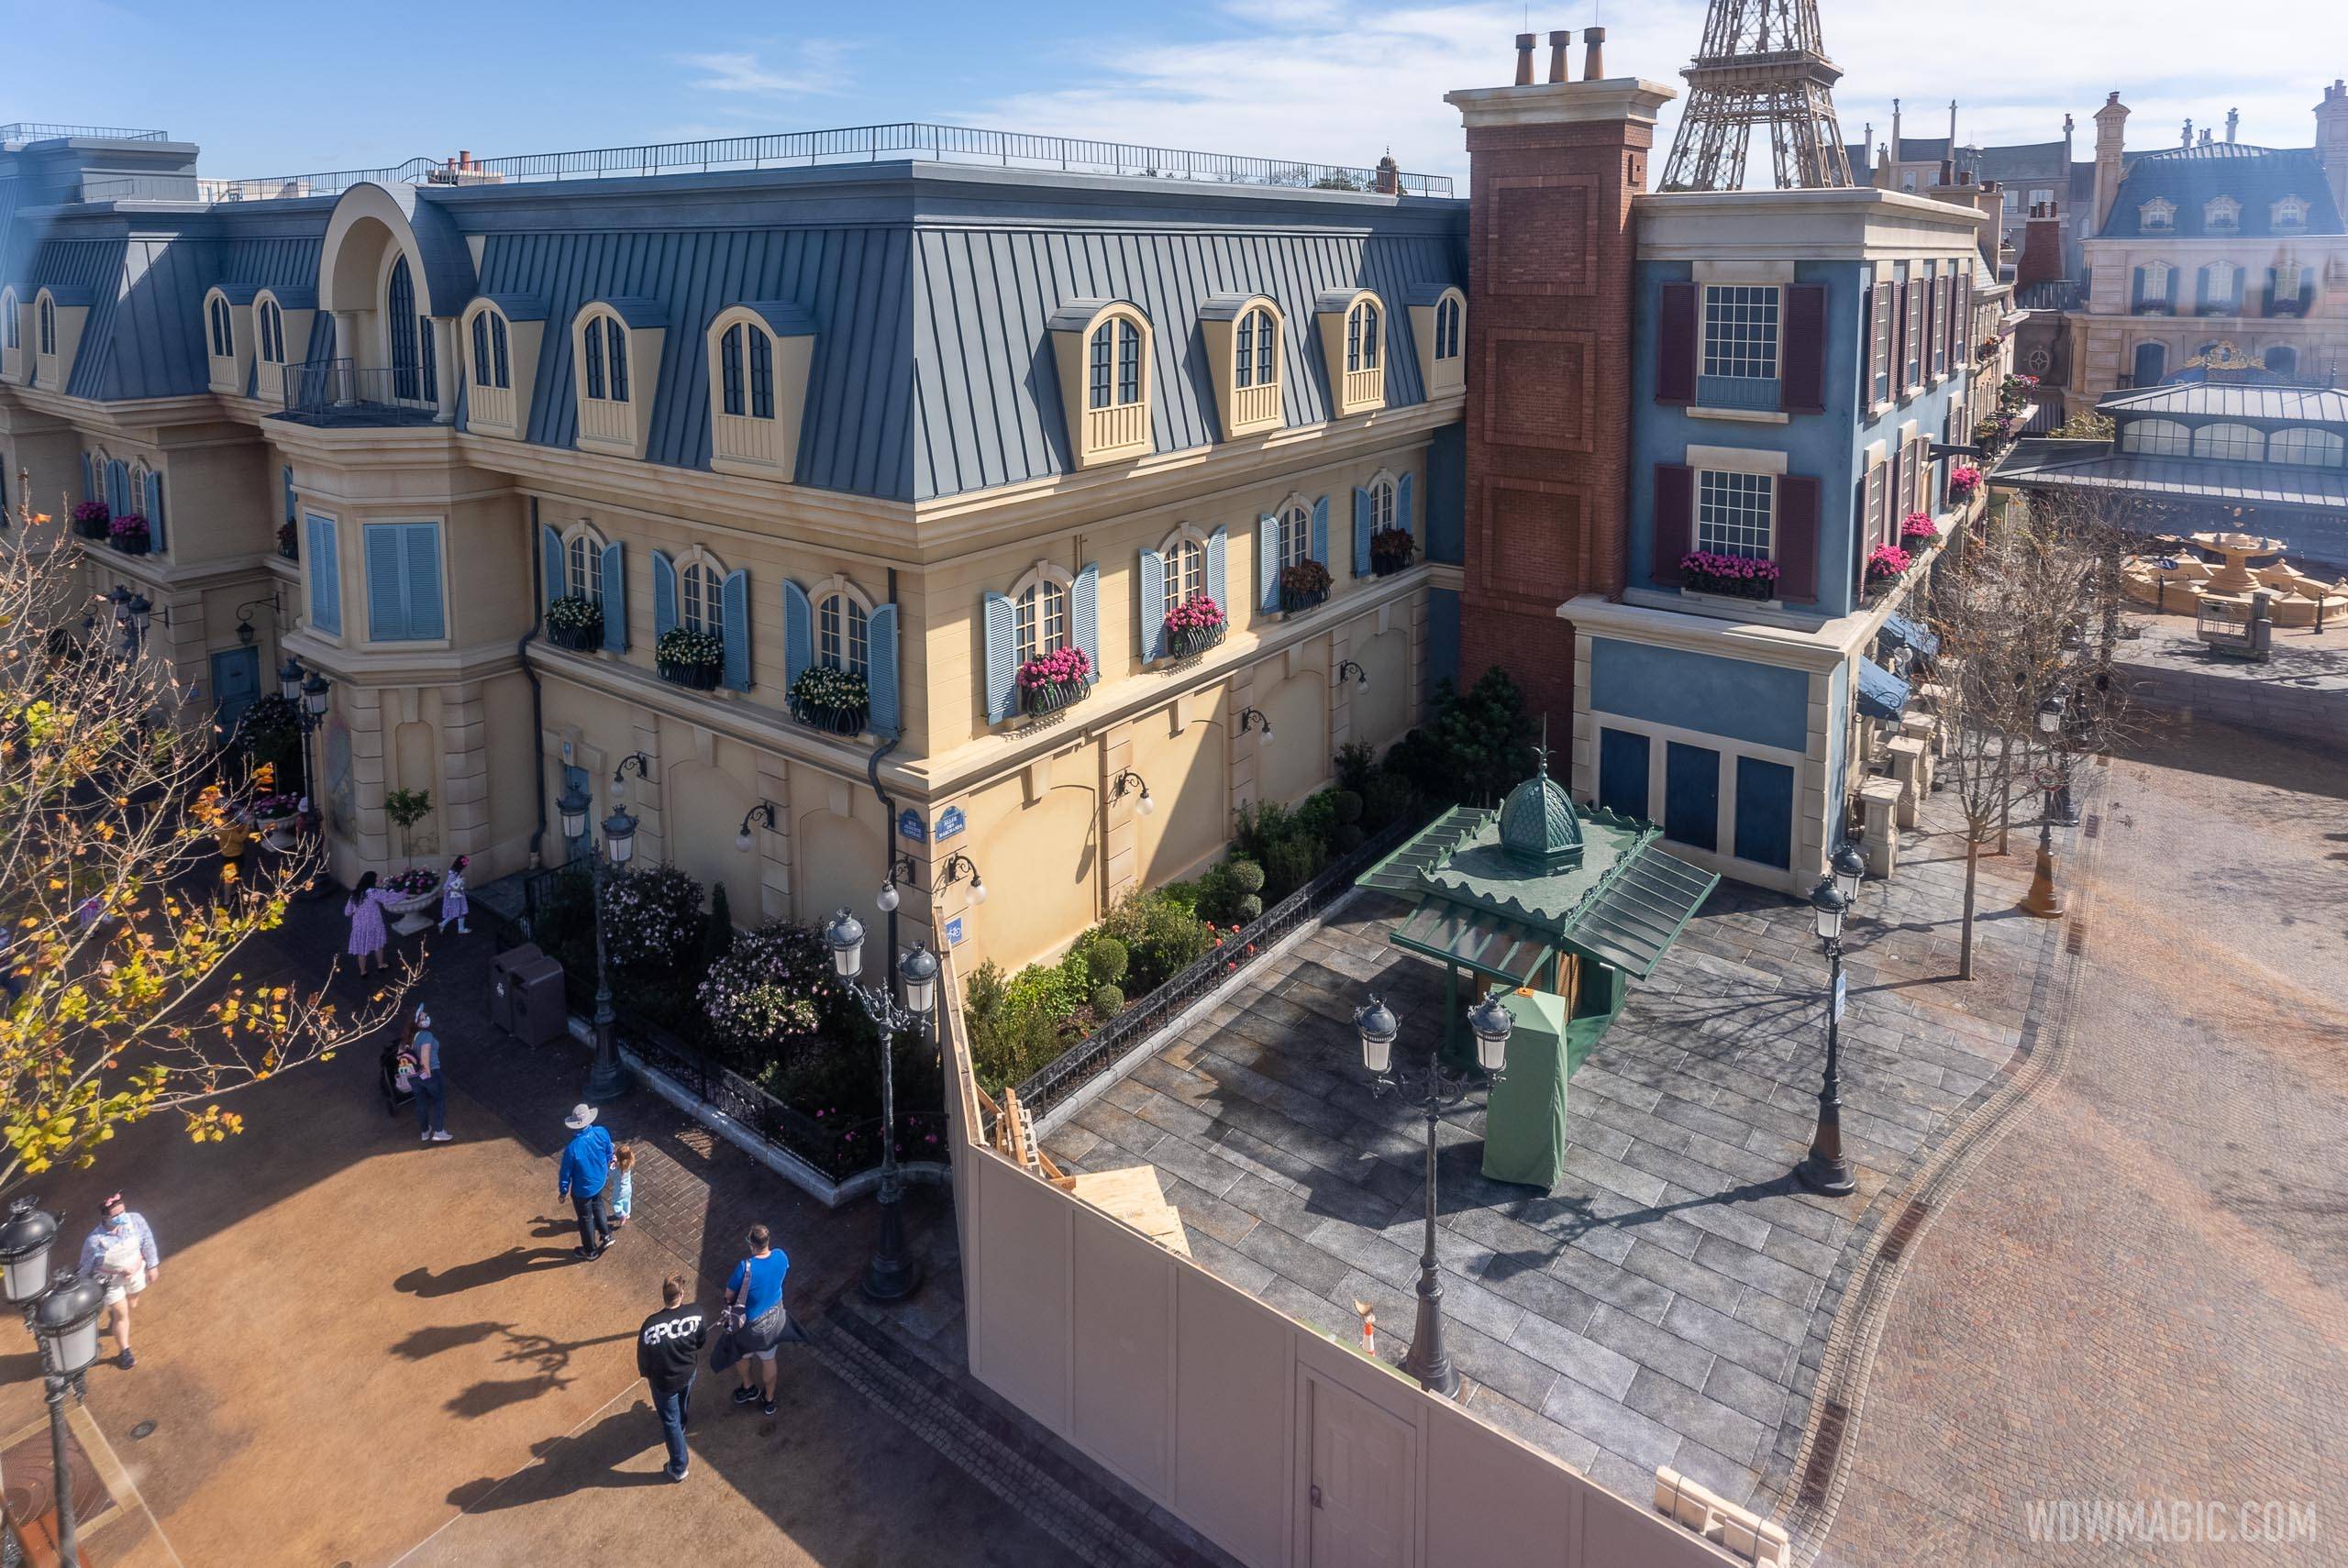 First phase of the France pavilion expansion opens to guests